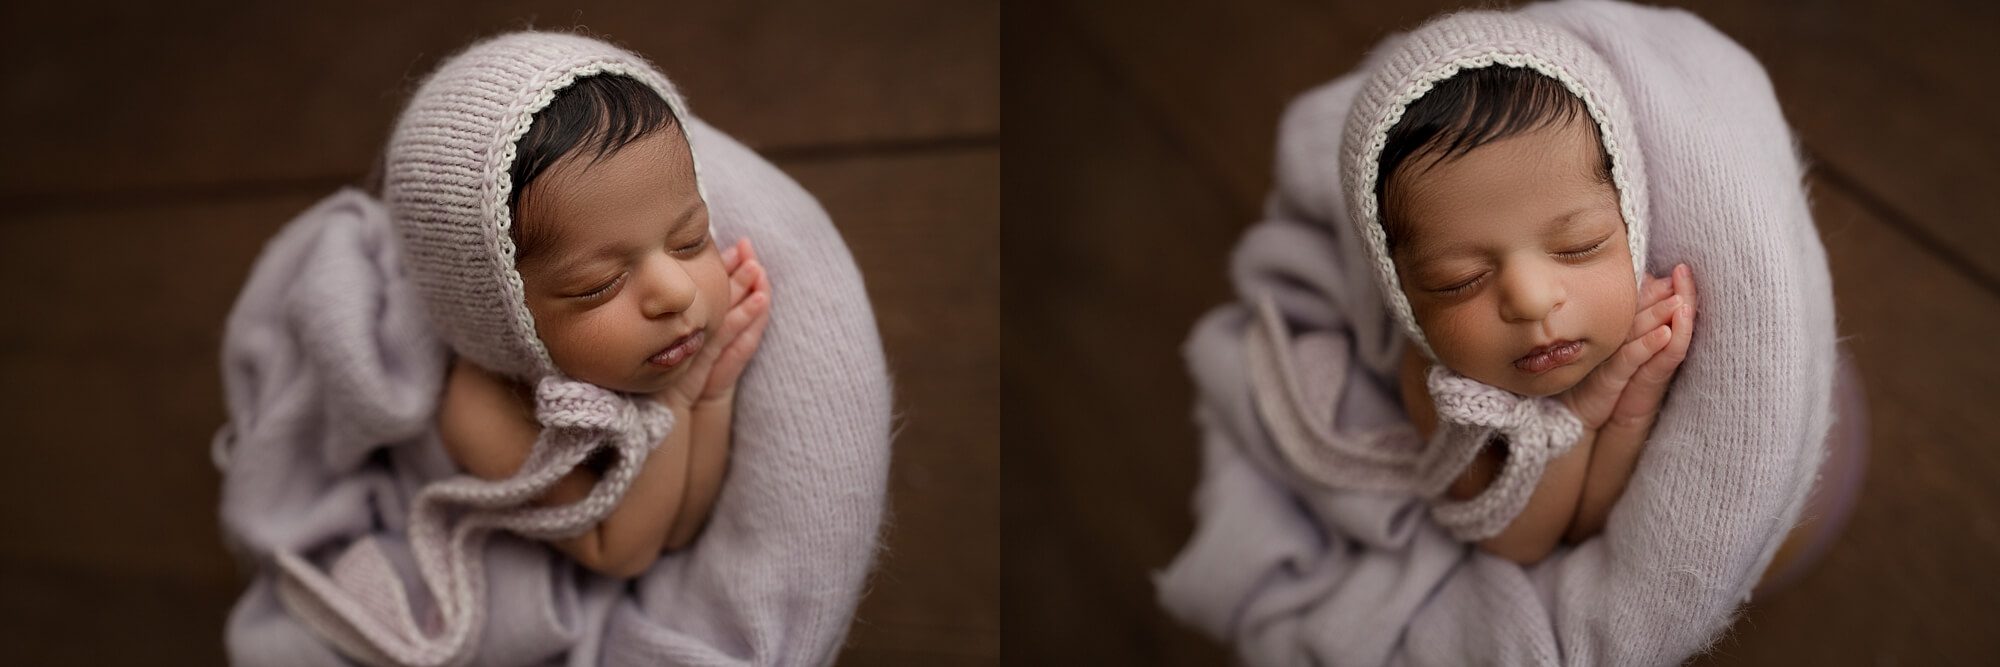 bellevue newborn photographer | indian baby family session